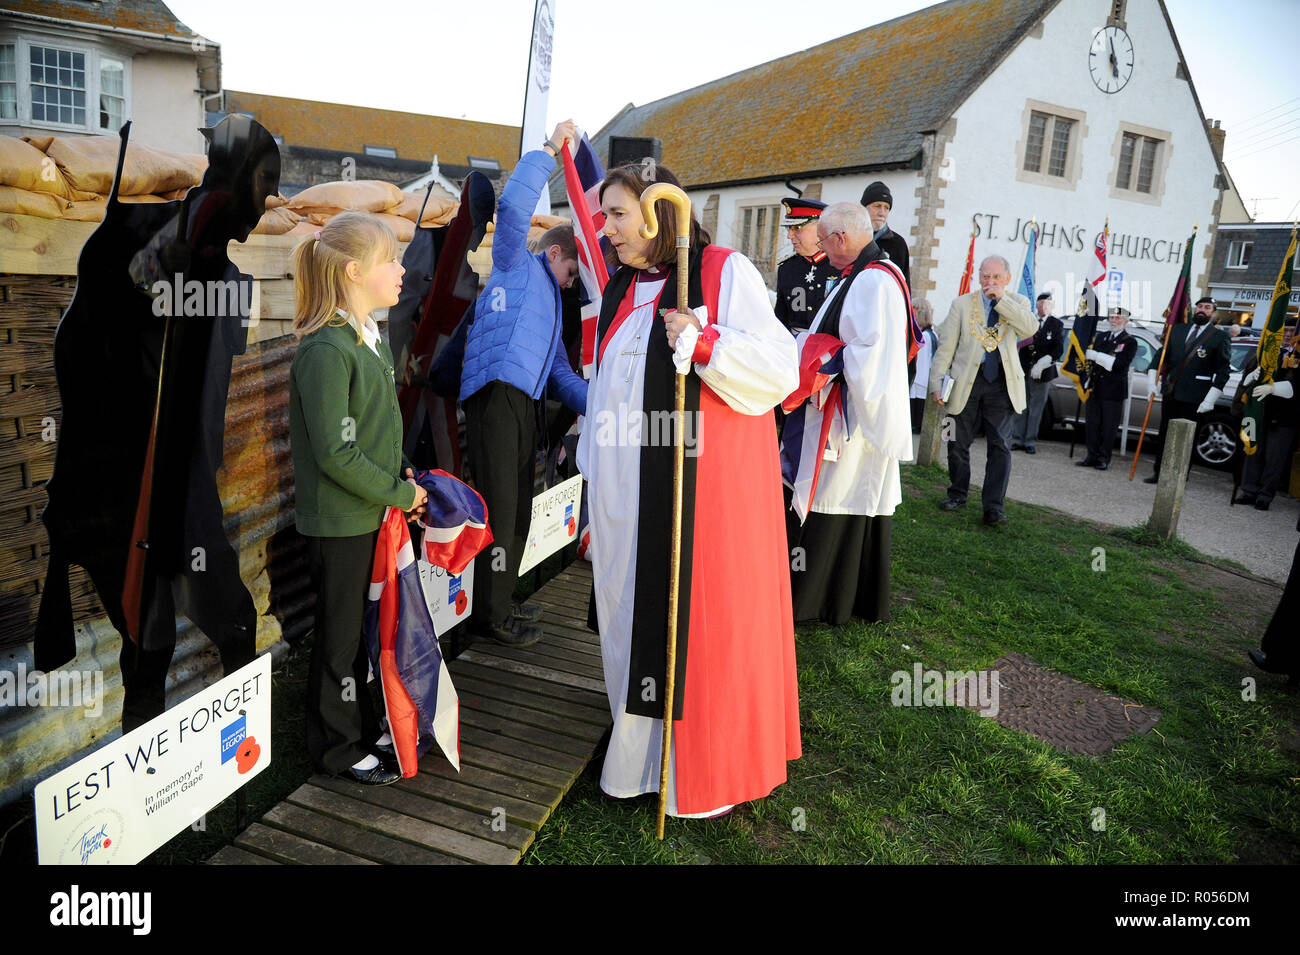 West Bay, Dorset, UK. 1st November, 2018. Six silent soldiers unveiled by six children to honour the lives of six local West Bay men who lost their lives in the First World War. The life-sized statues on display at Harbour Green in West Bay honour local men - Robert Buckler, William Gape, Herbert Gush, Richard Glare, Frederick Hoskins and Alfred Oliver. Credit: Finnbarr Webster/Alamy Live News Stock Photo